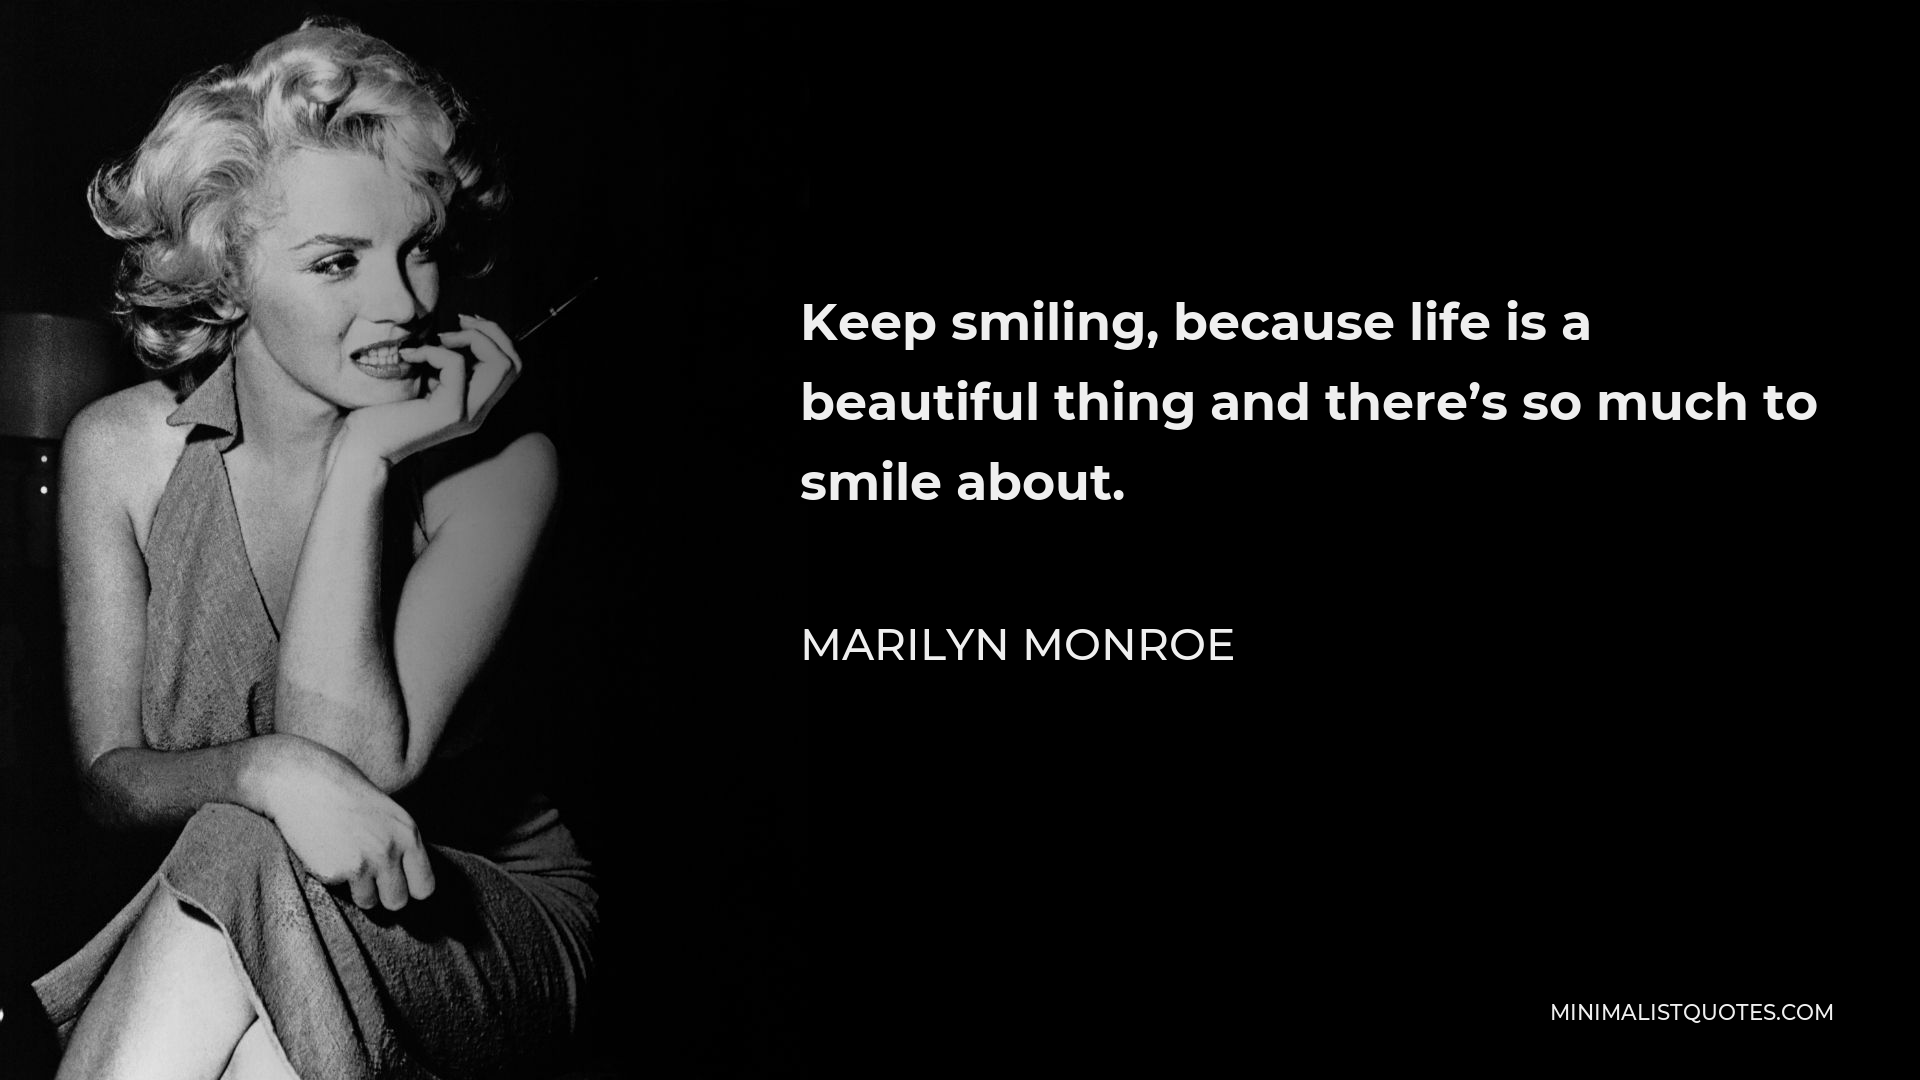 Marilyn Monroe Quote - Keep smiling, because life is a beautiful thing and there’s so much to smile about.